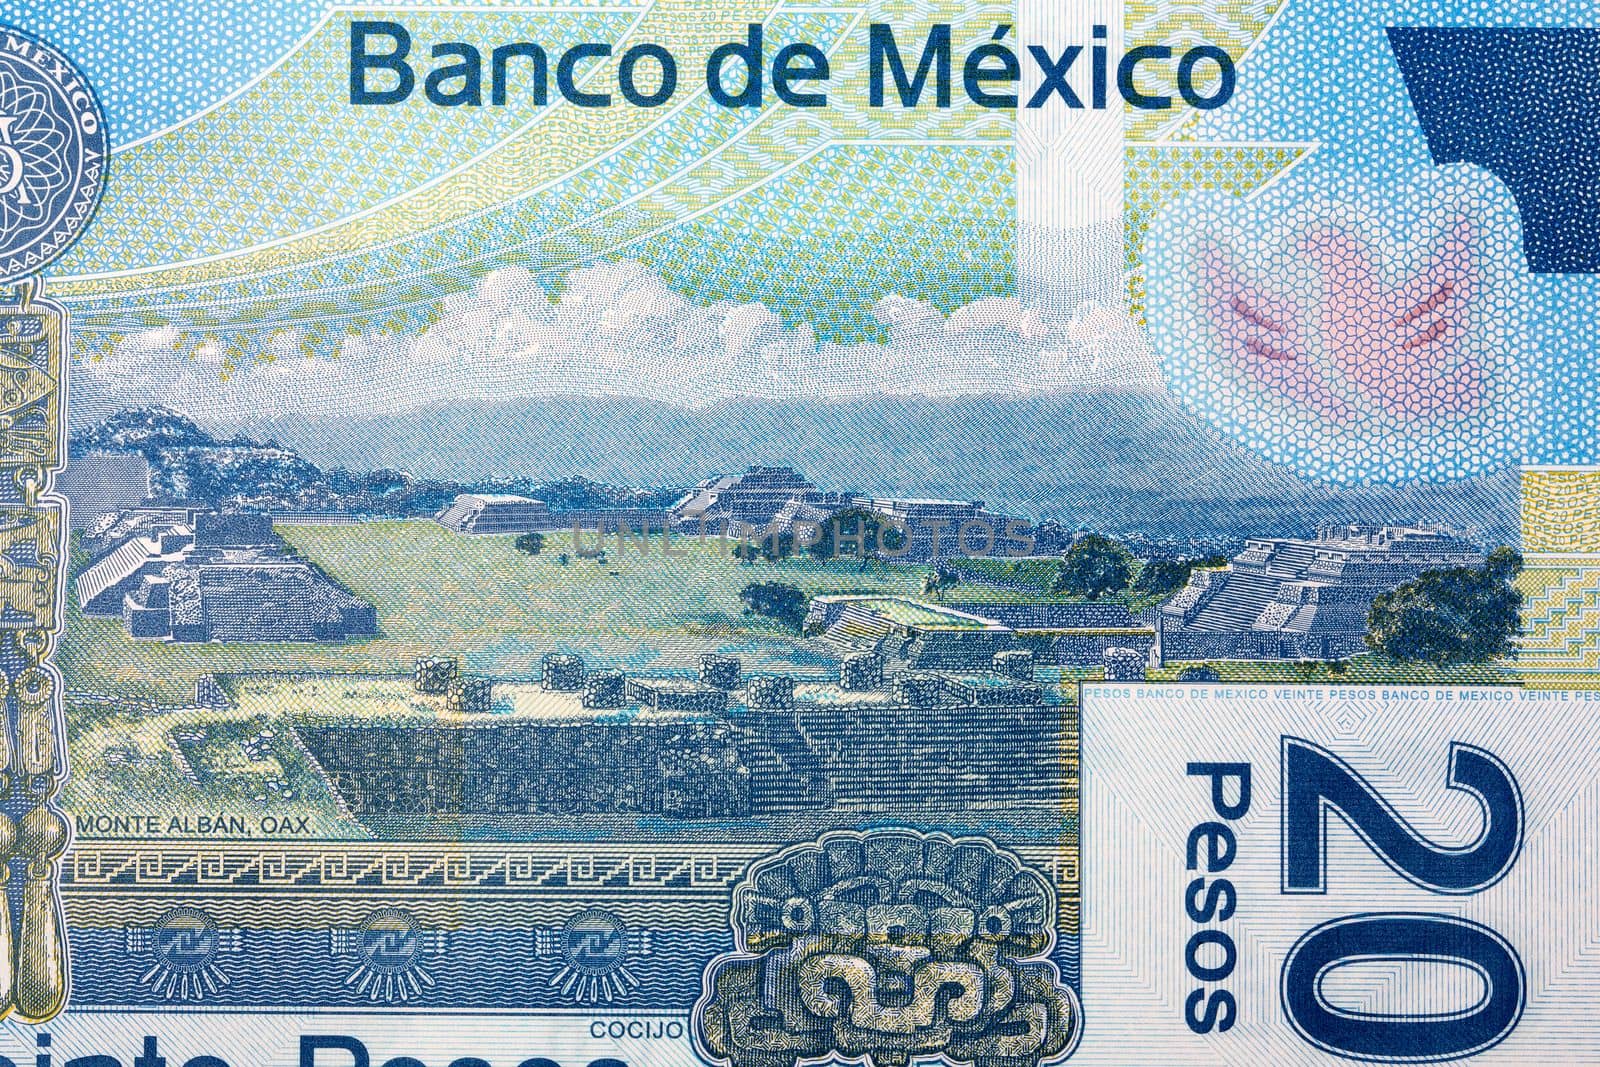 View of Monte Alban from Mexican money - Pesos